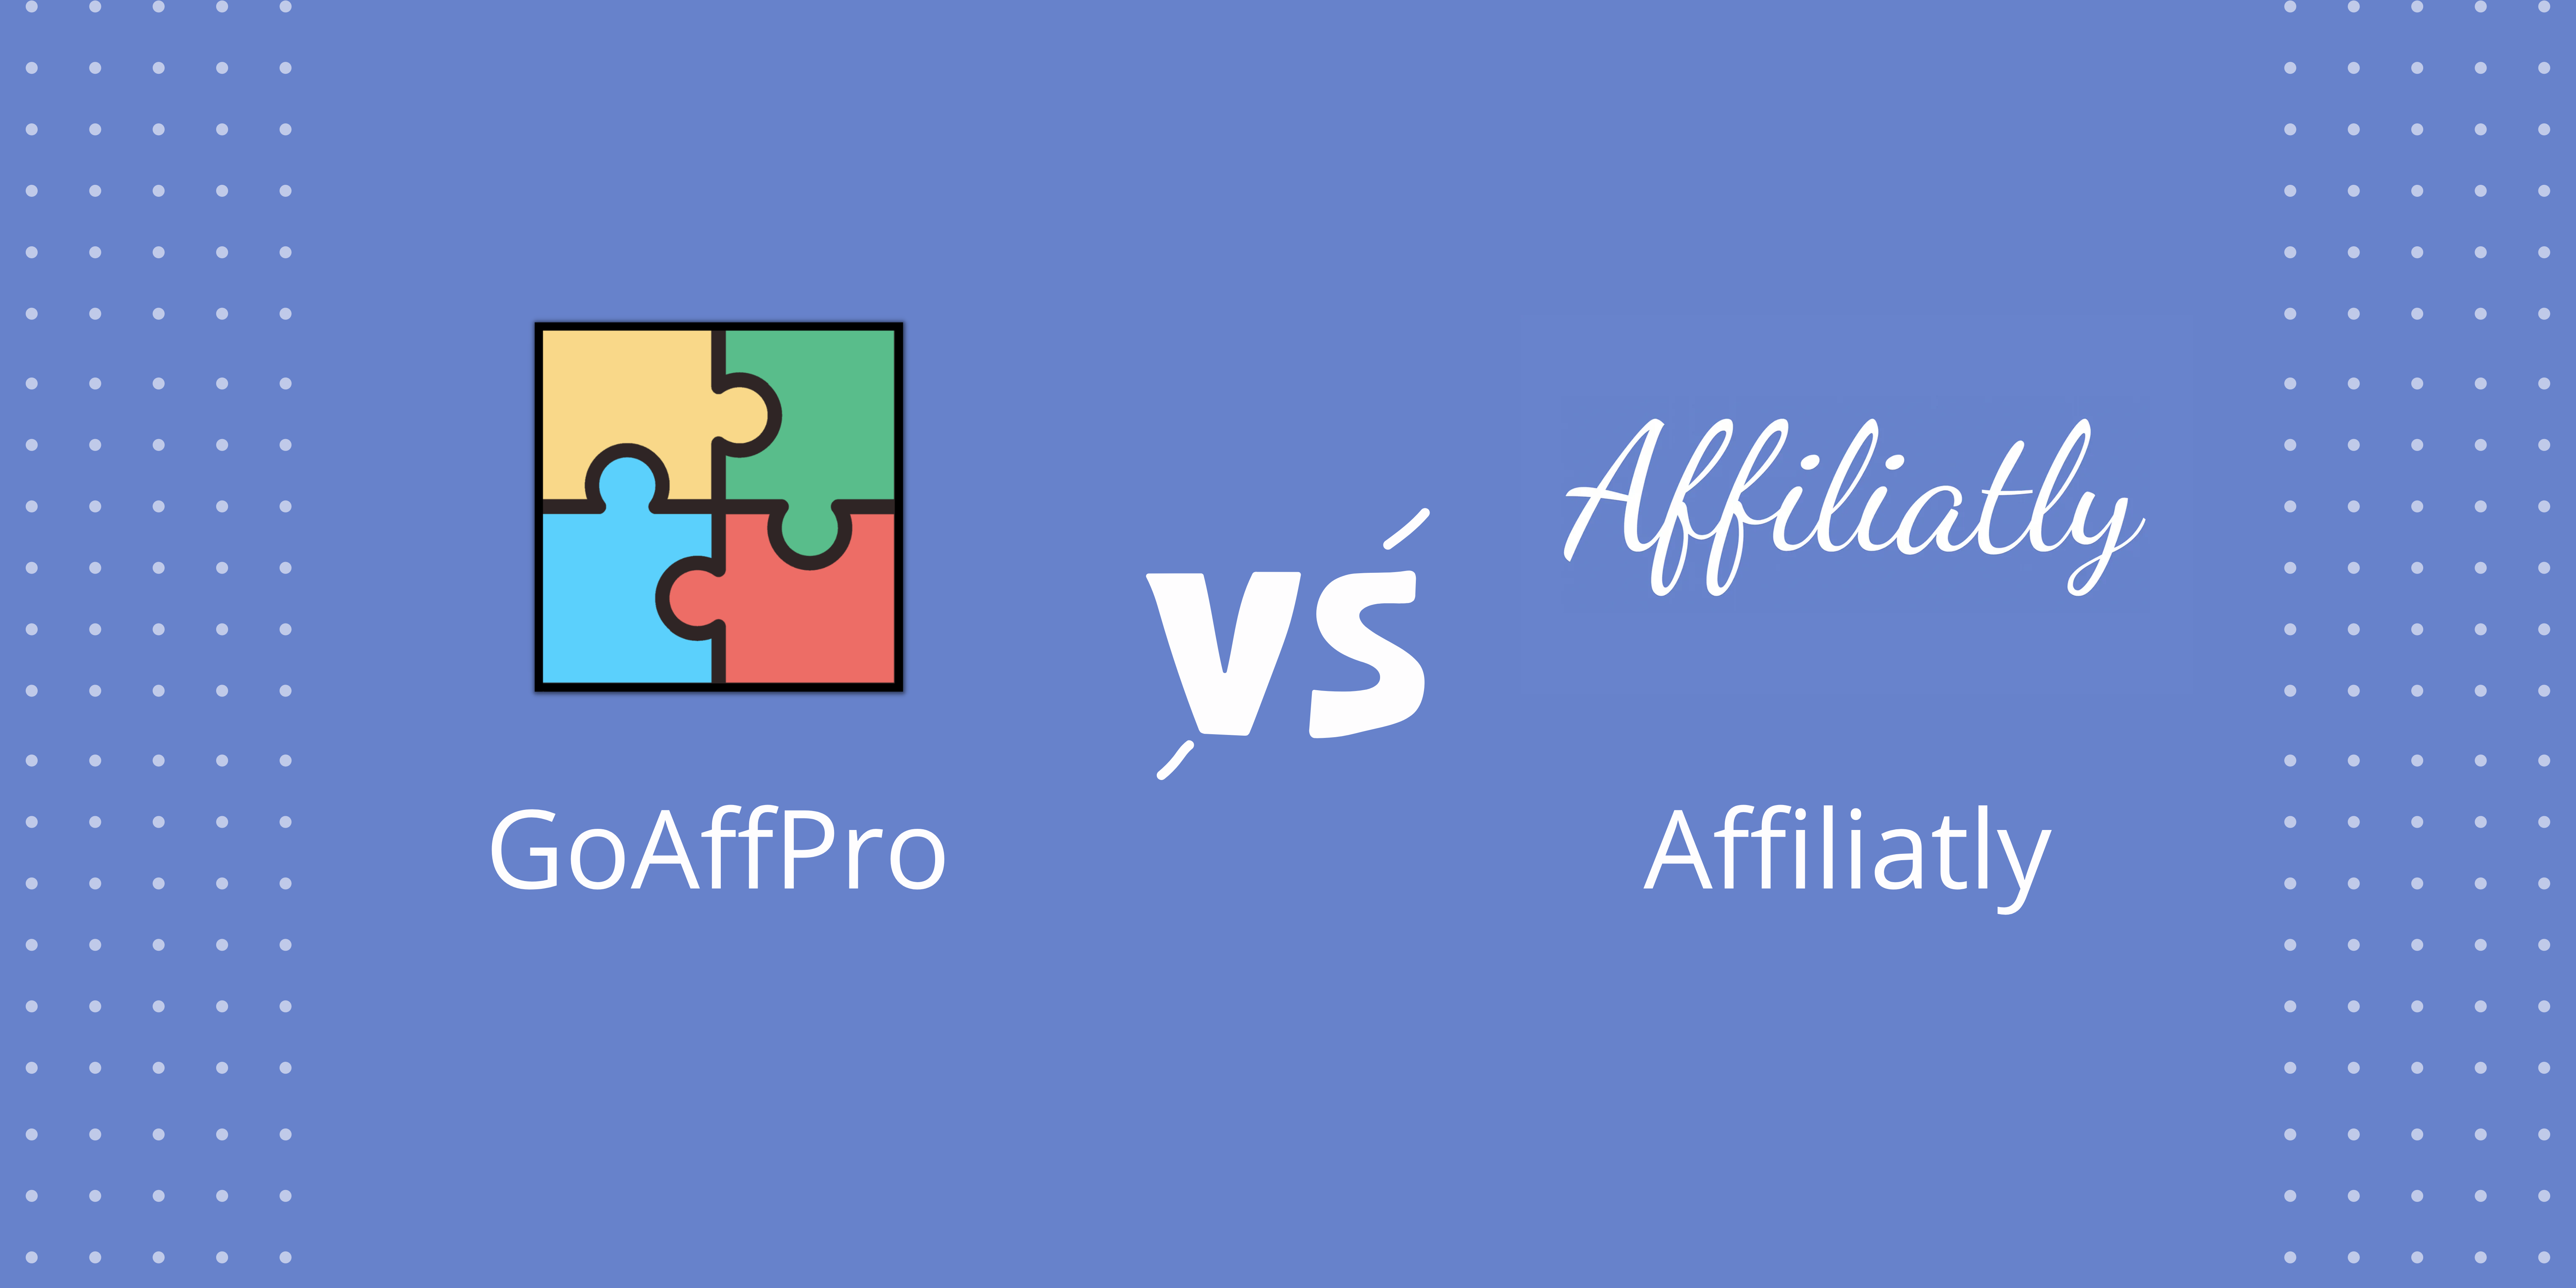 GoAffPro vs Affiliatly: How do they stack up?